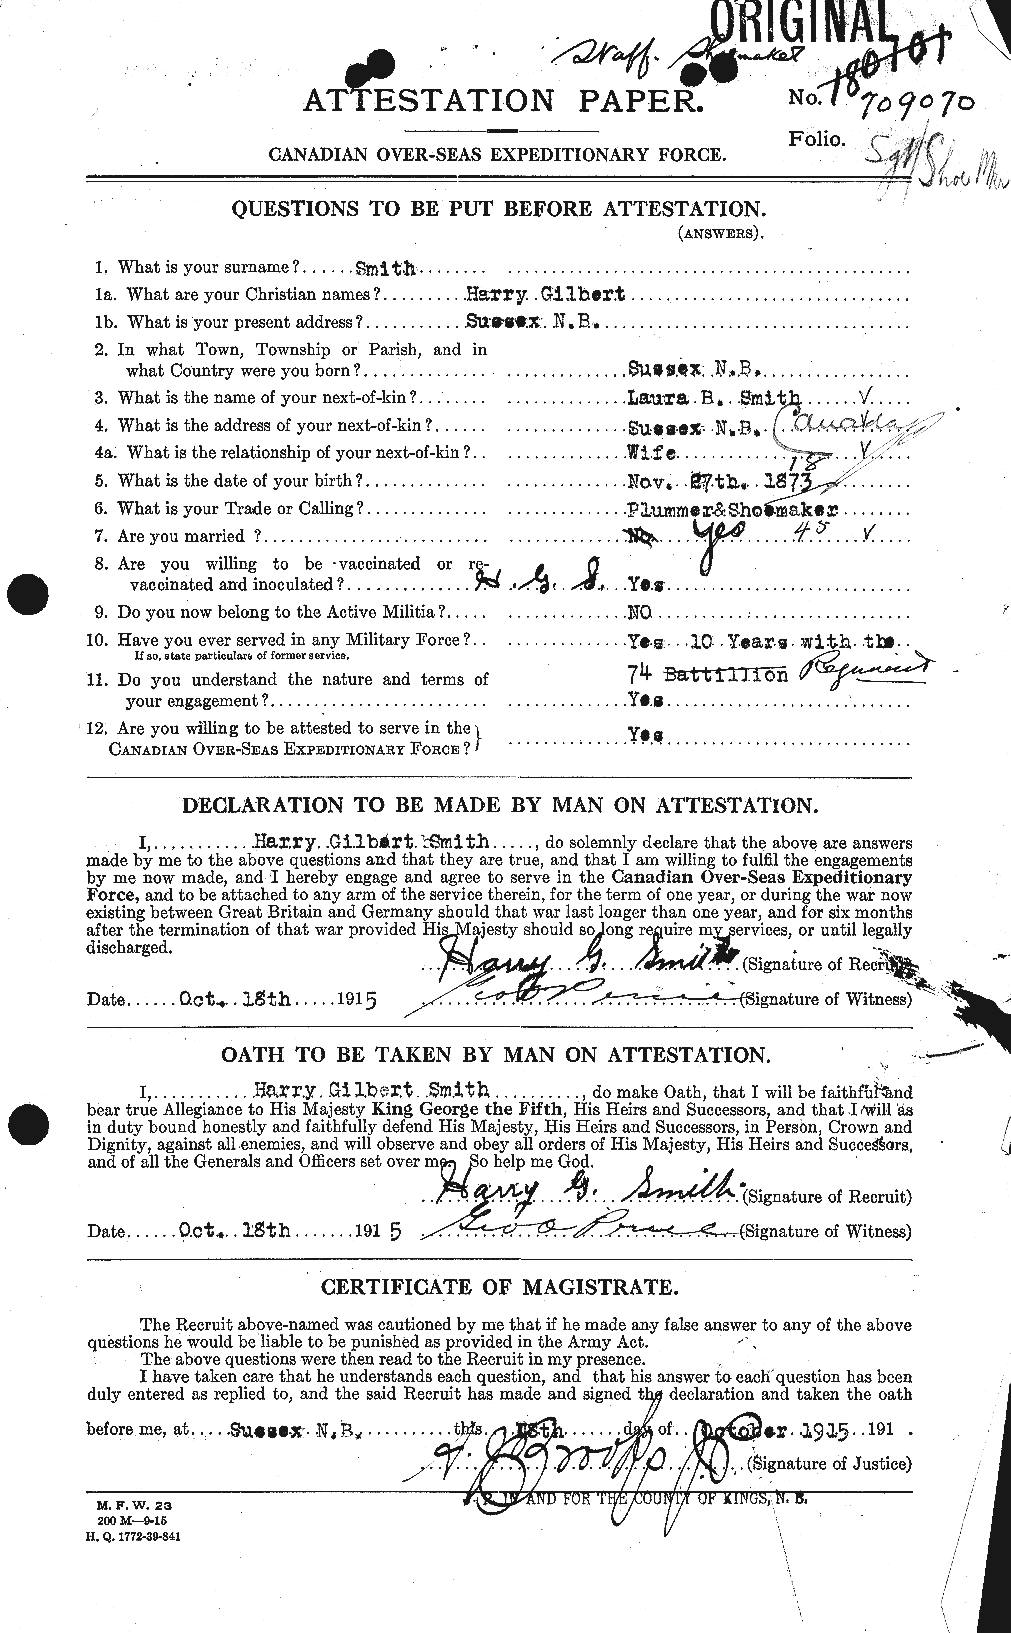 Personnel Records of the First World War - CEF 105577a